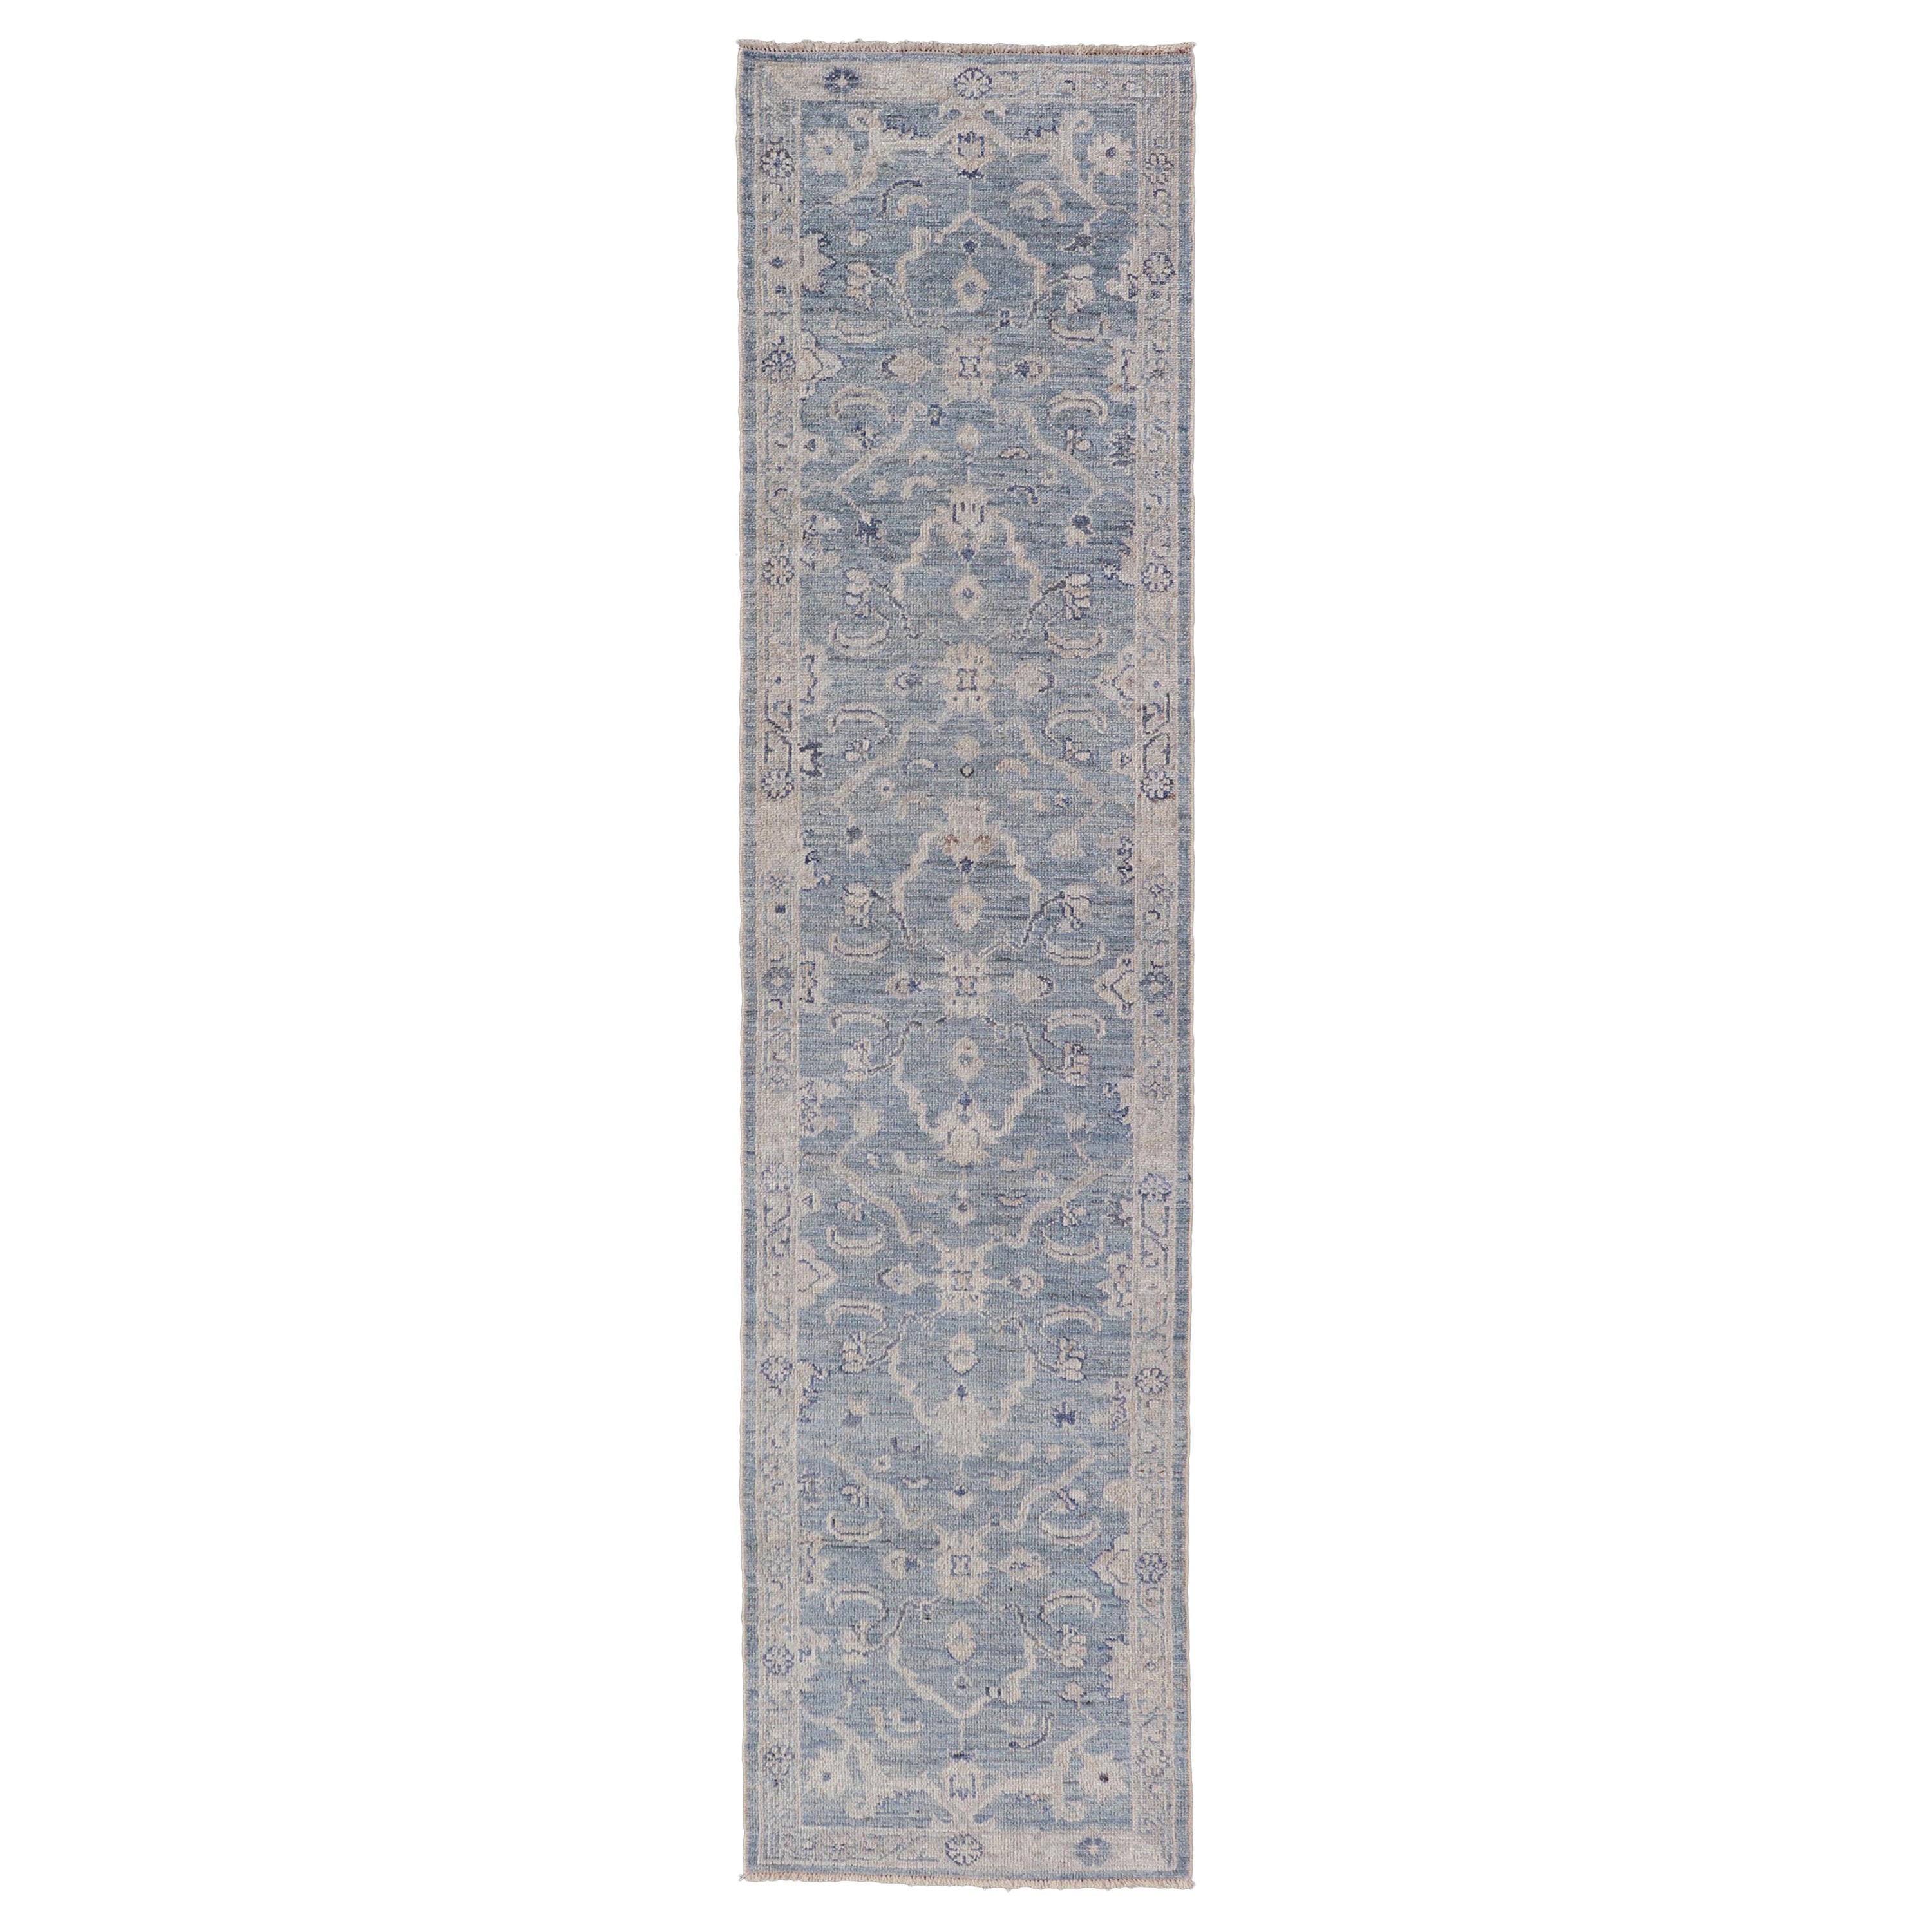 Angora Turkish Oushak Runner with Floral Design and Medium Blue and Grey Border